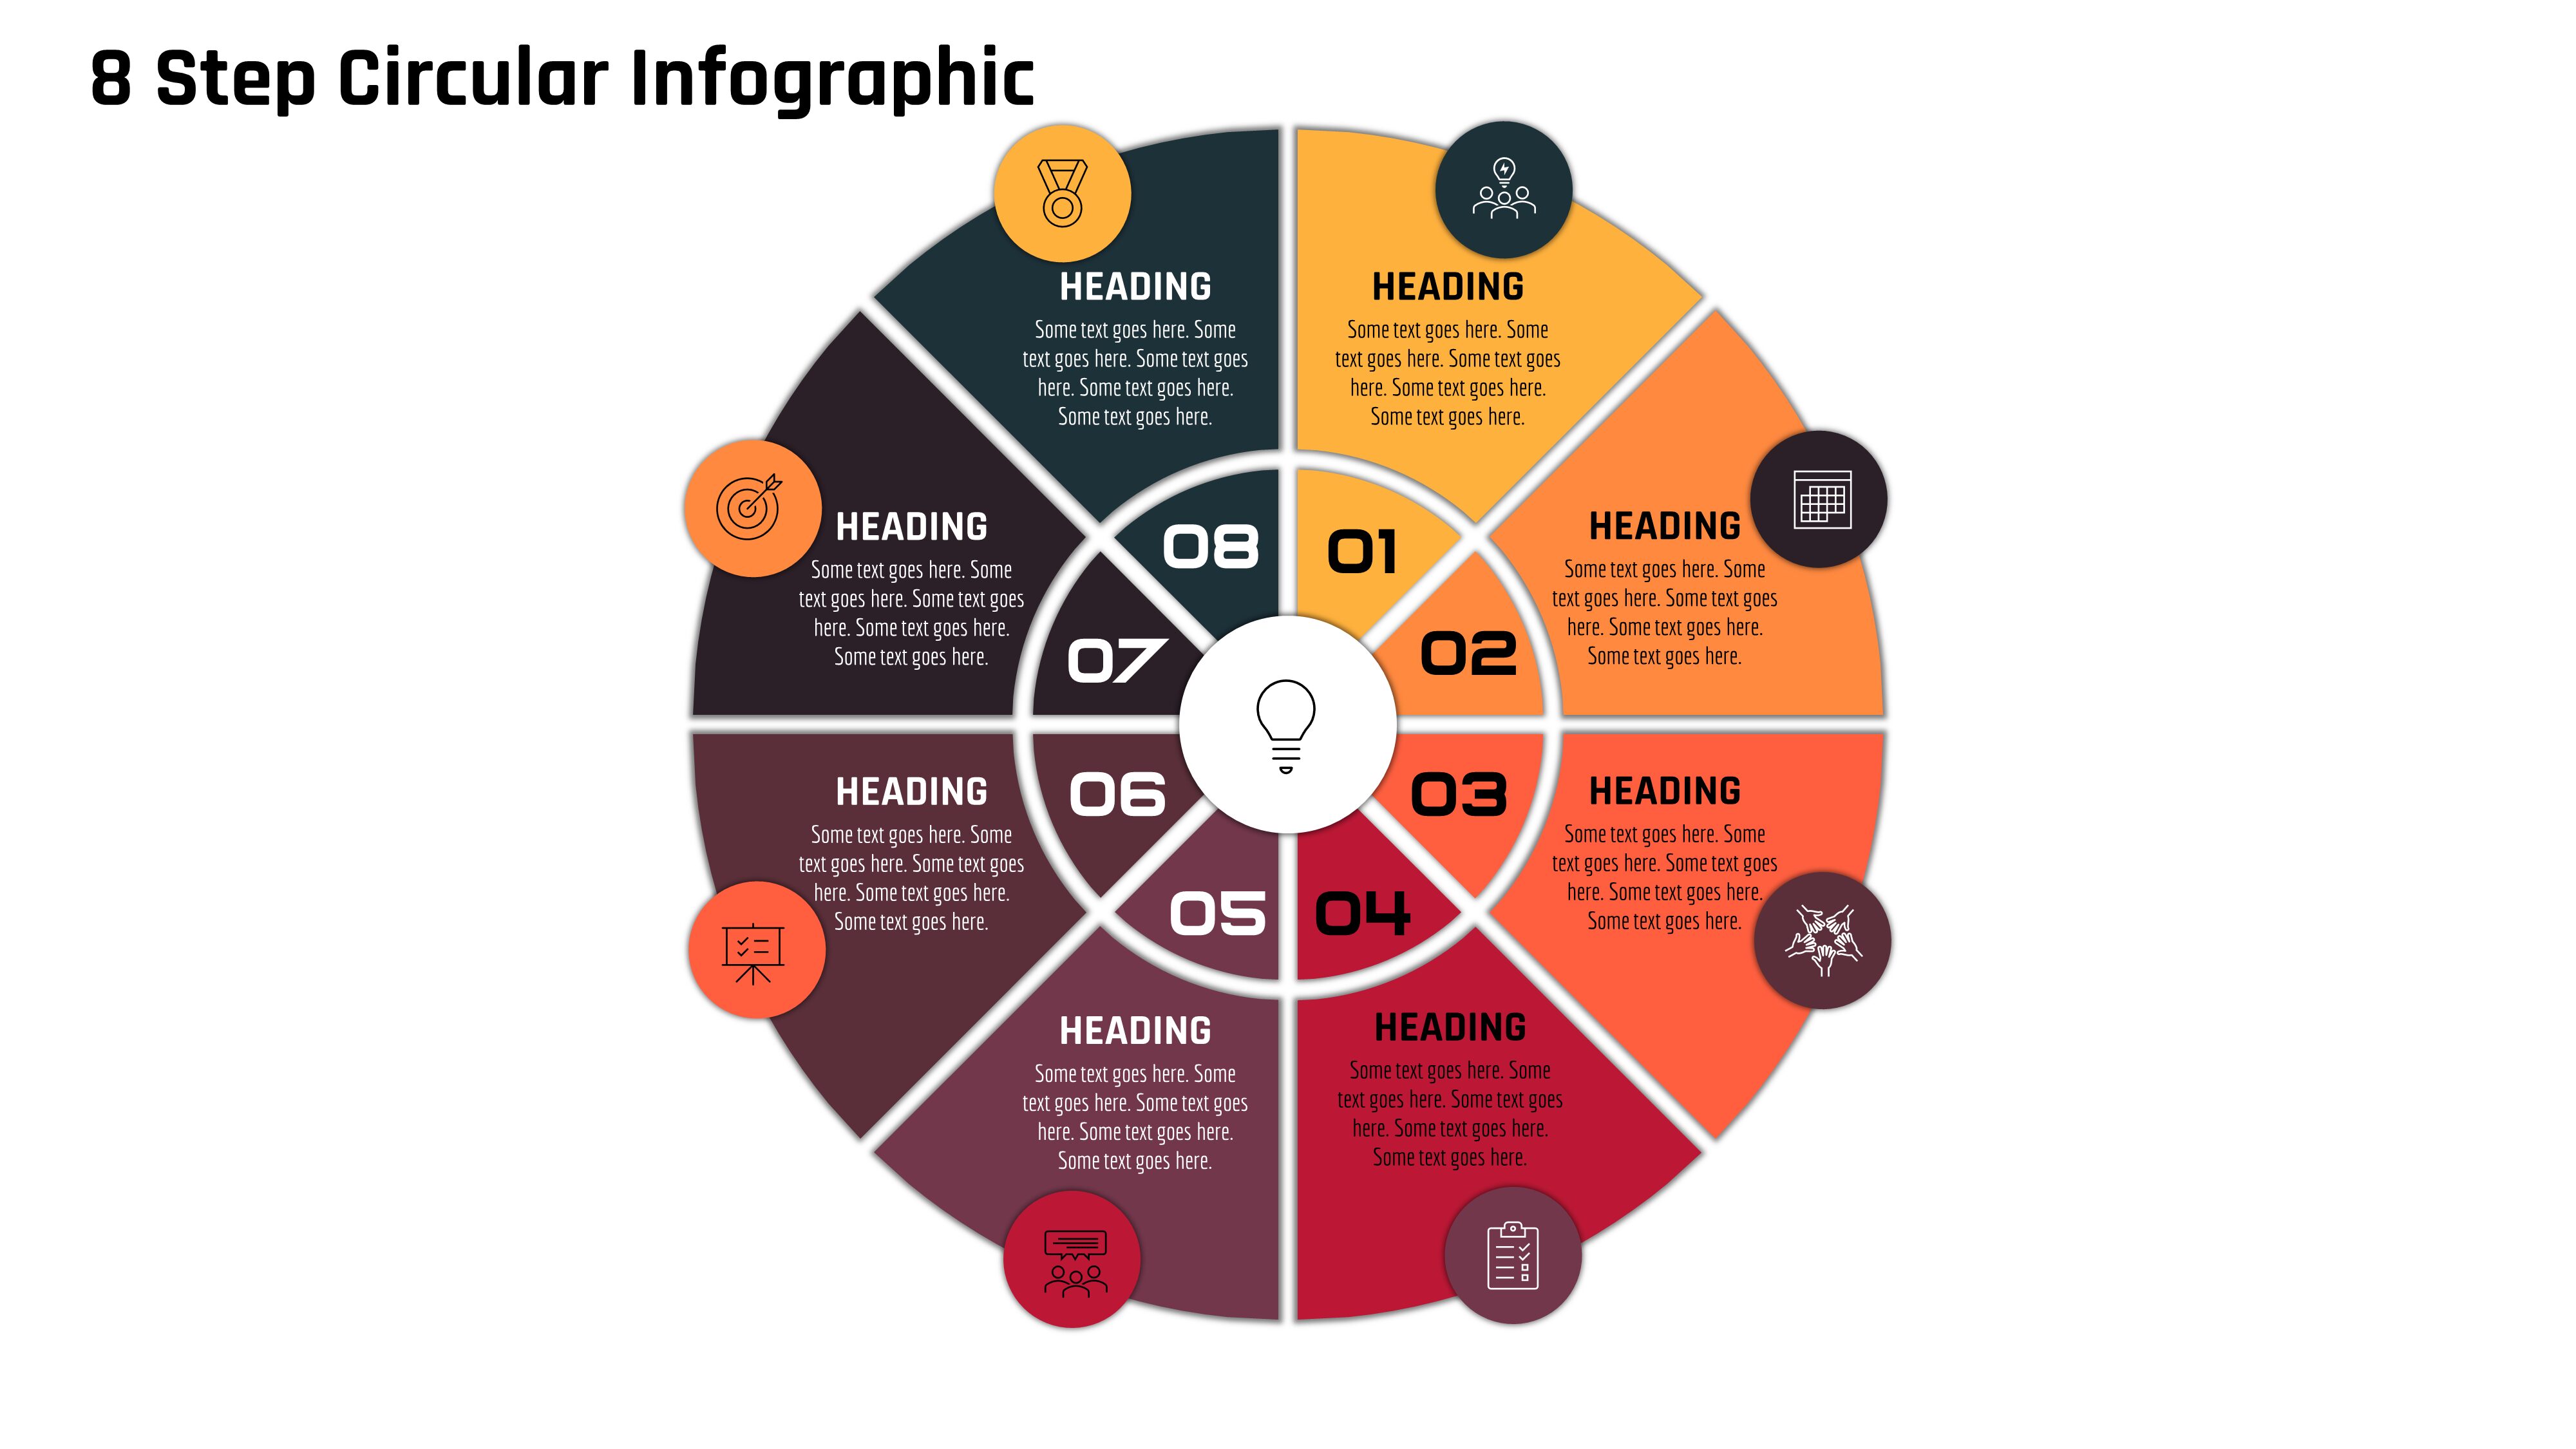 43powerpoint Presentation With 8 Step Circular Infographic Powerup With Powerpoint 9331